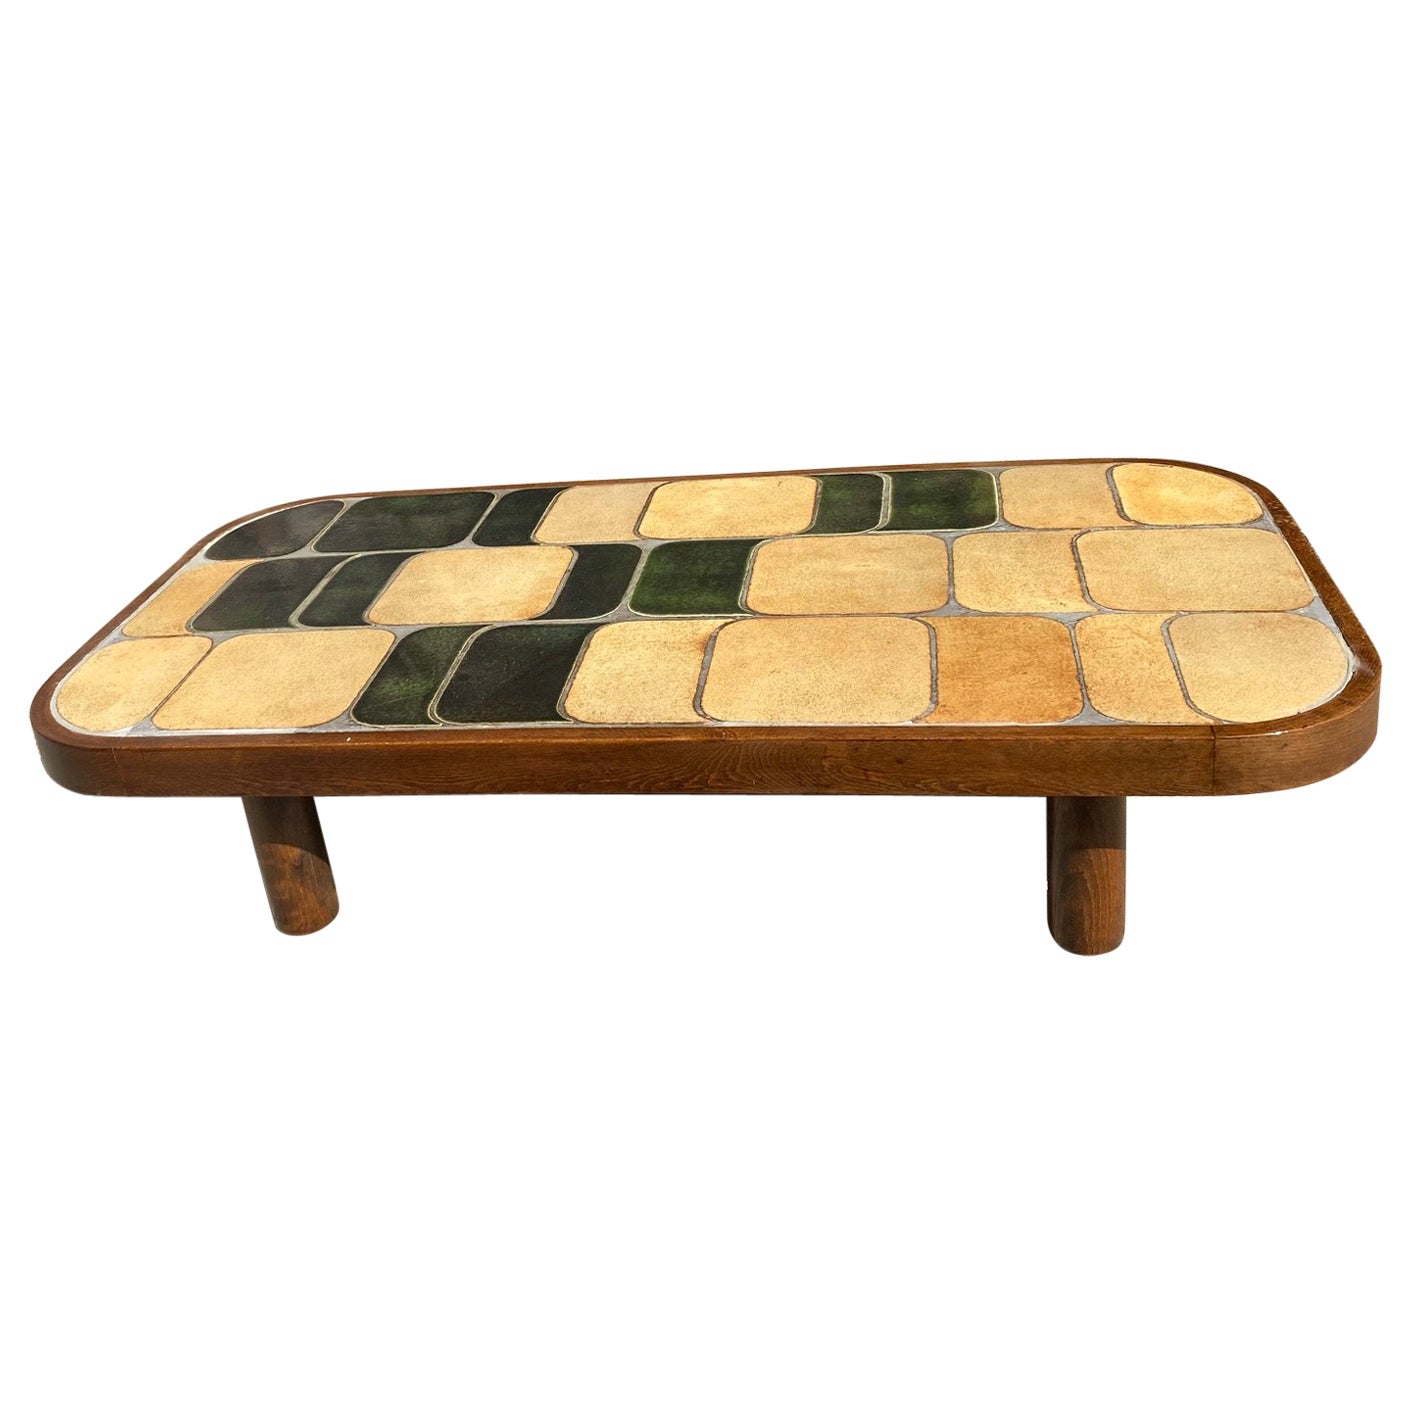 "Shogun" Ceramic Coffee Table by Roger Capron, Vallauris, France, 1970s